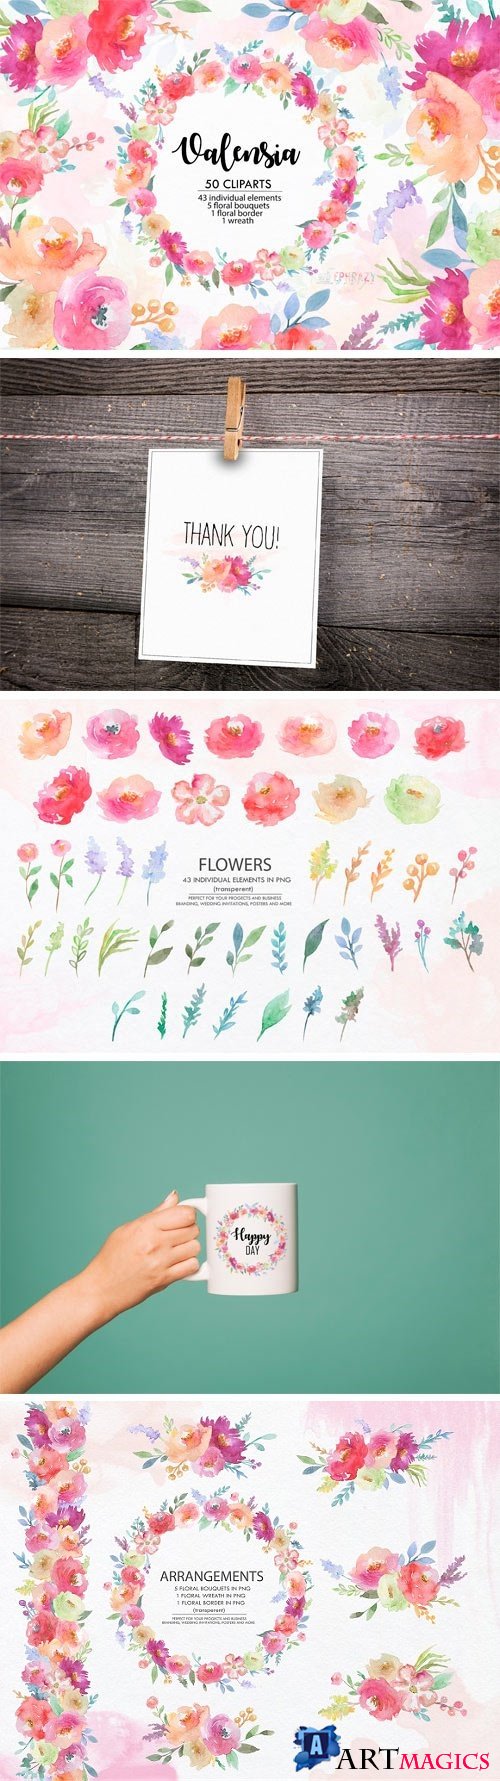 Valensia. Floral Clipart. Watercolor - 2370436